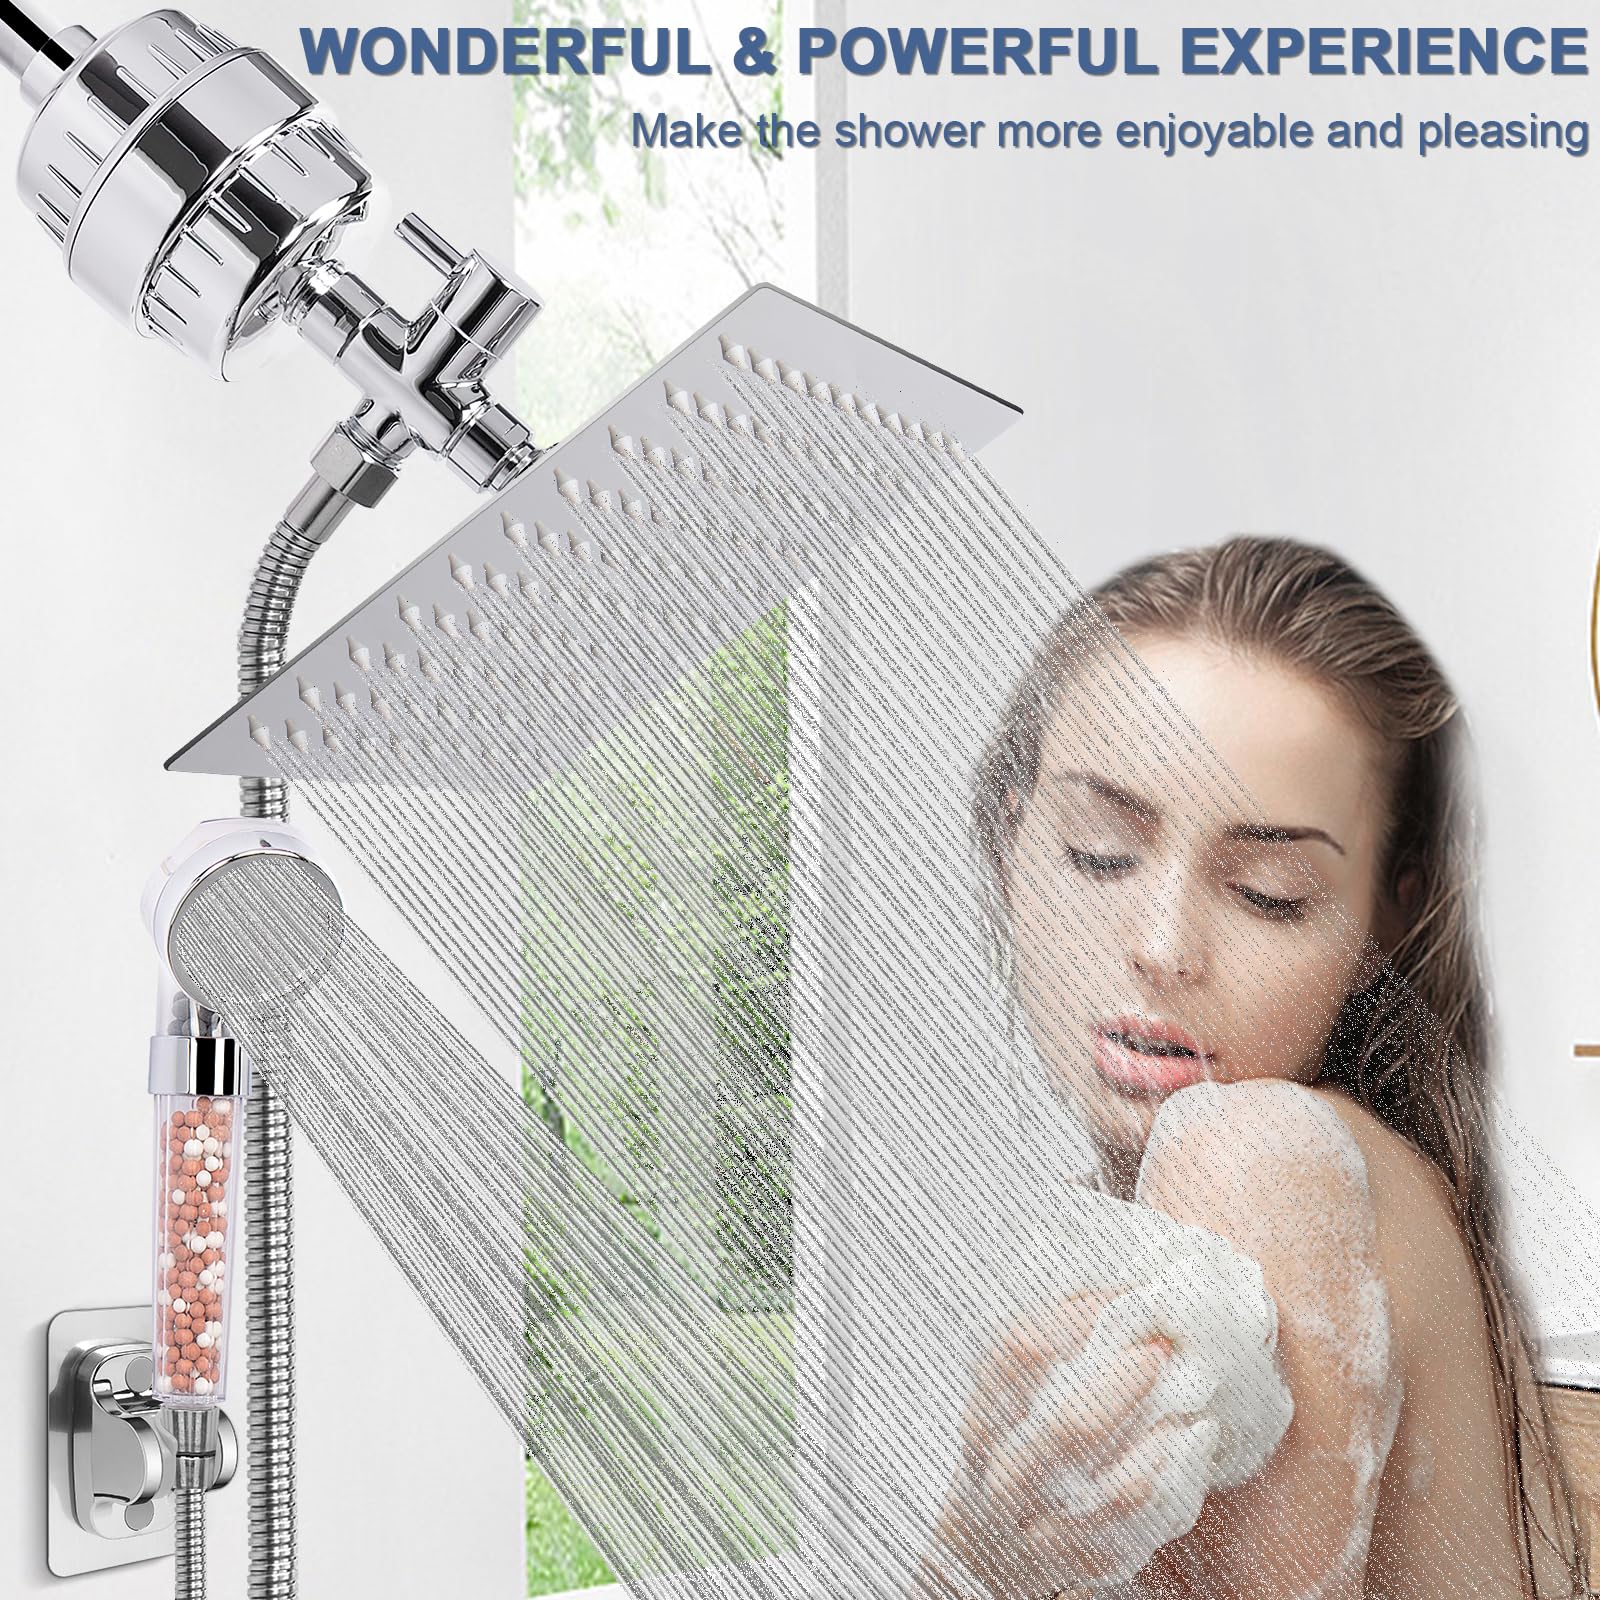 HarJue Filter Shower Head, High Pressure ShowerHead with Filter Combo for Hard Water, Remove Chlorine Fluoride and Harmful Substances- 1 Replaceable Filter Cartridge（8 Inch, Chrome）